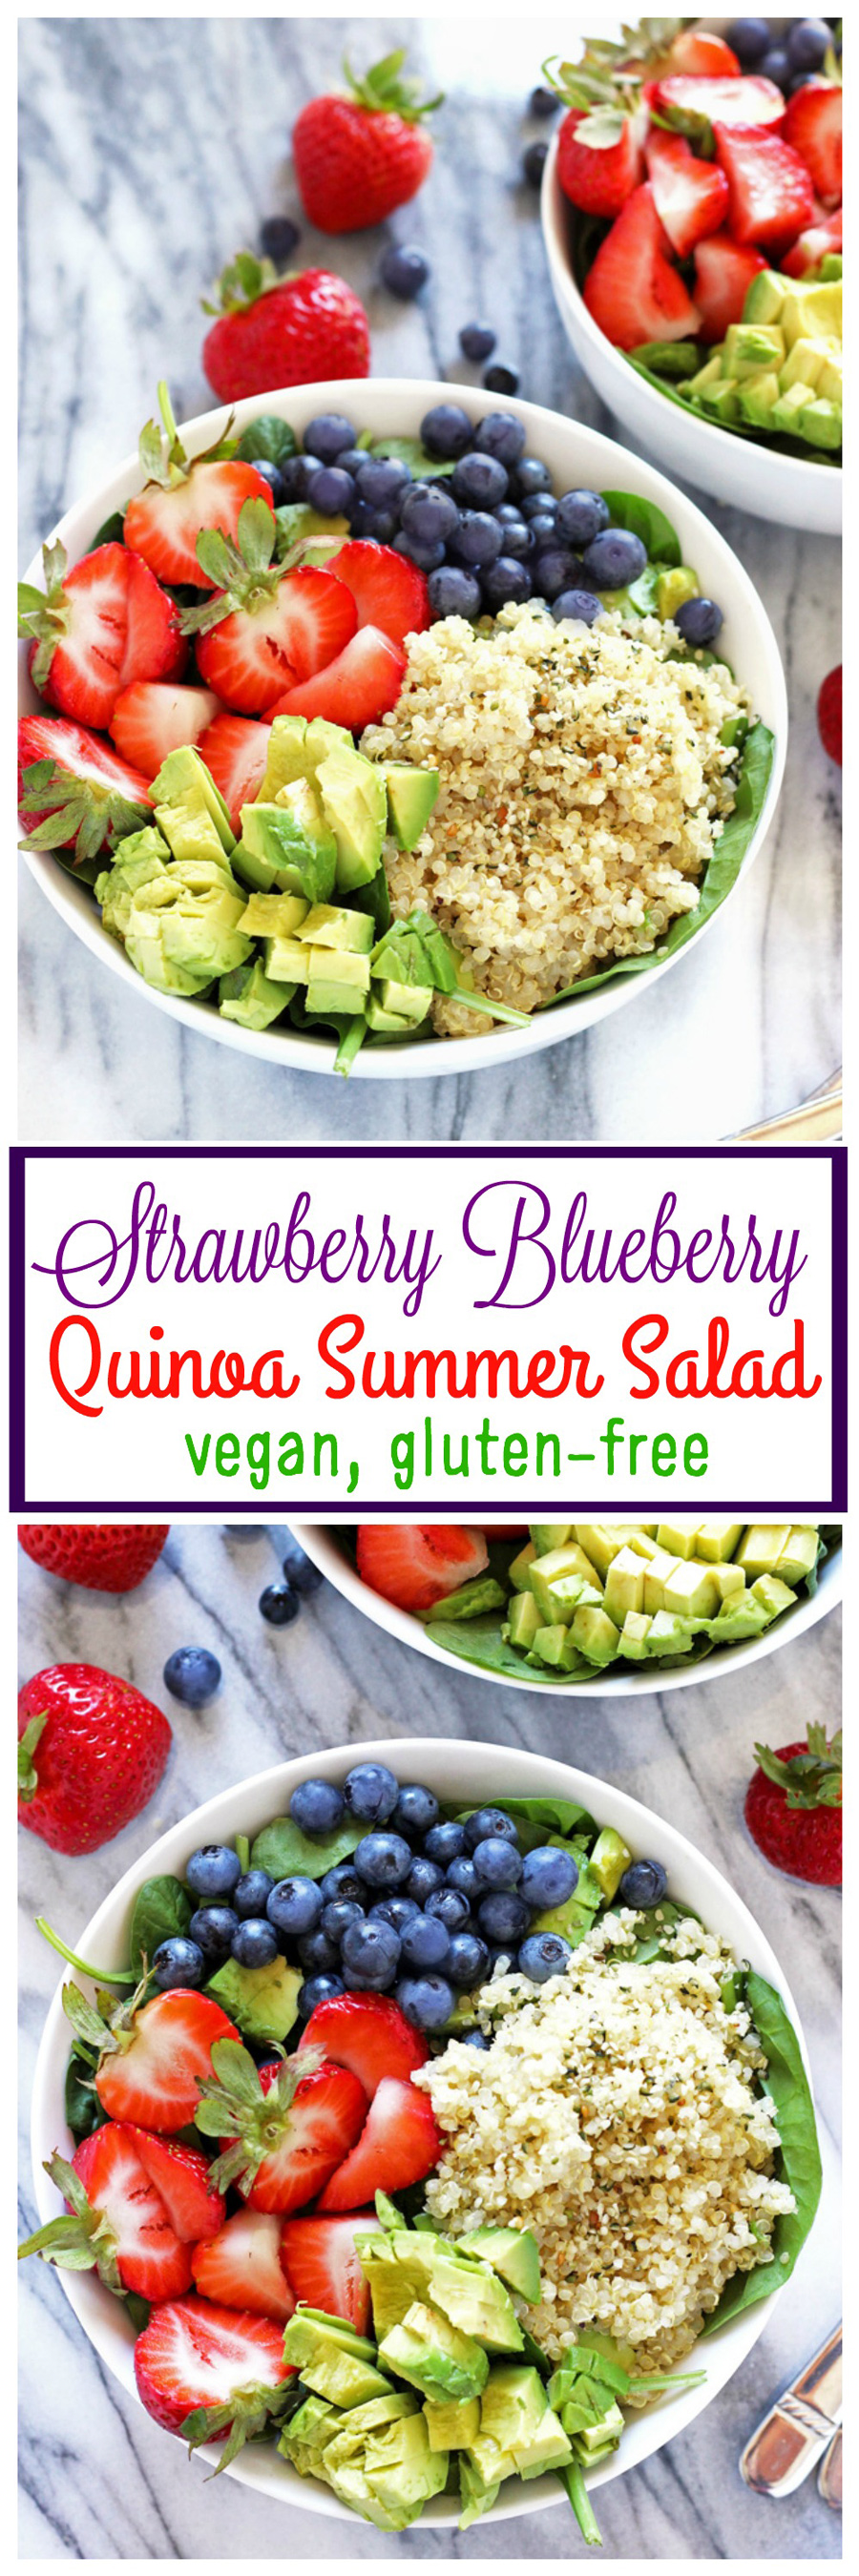 Strawberry Blueberry Quinoa Summer Salad - A healthy salad mixed perfecting with sweetness and coolness, packed with the right amount of plant based protein, ready to beat the heat. NeuroticMommy.com #healthy #vegan #salads